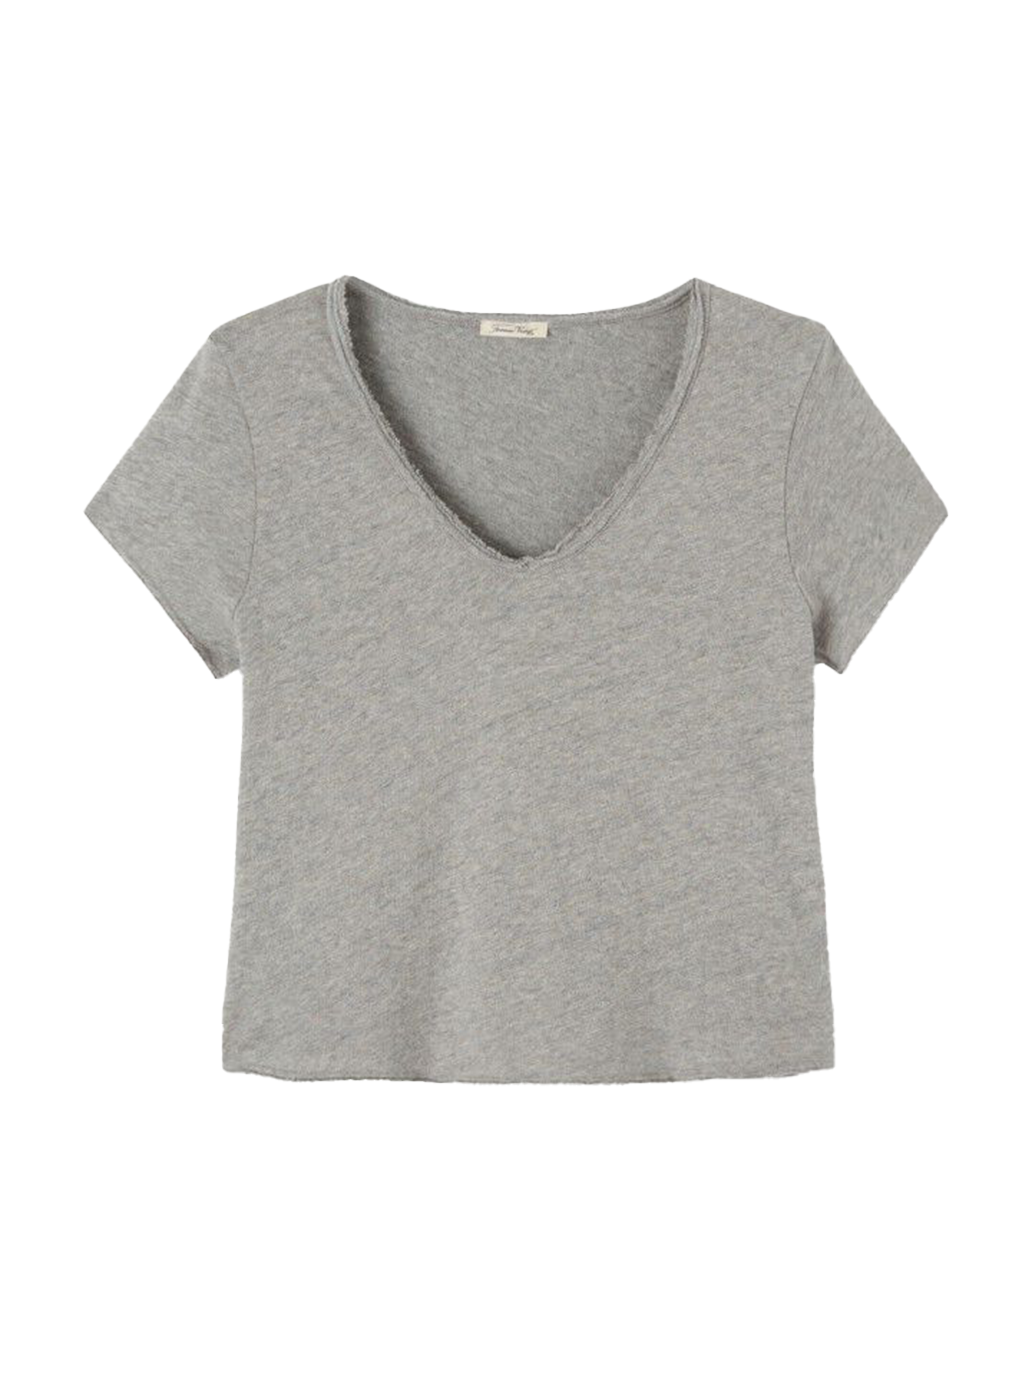 T-shirt with a raw Sonoma finish